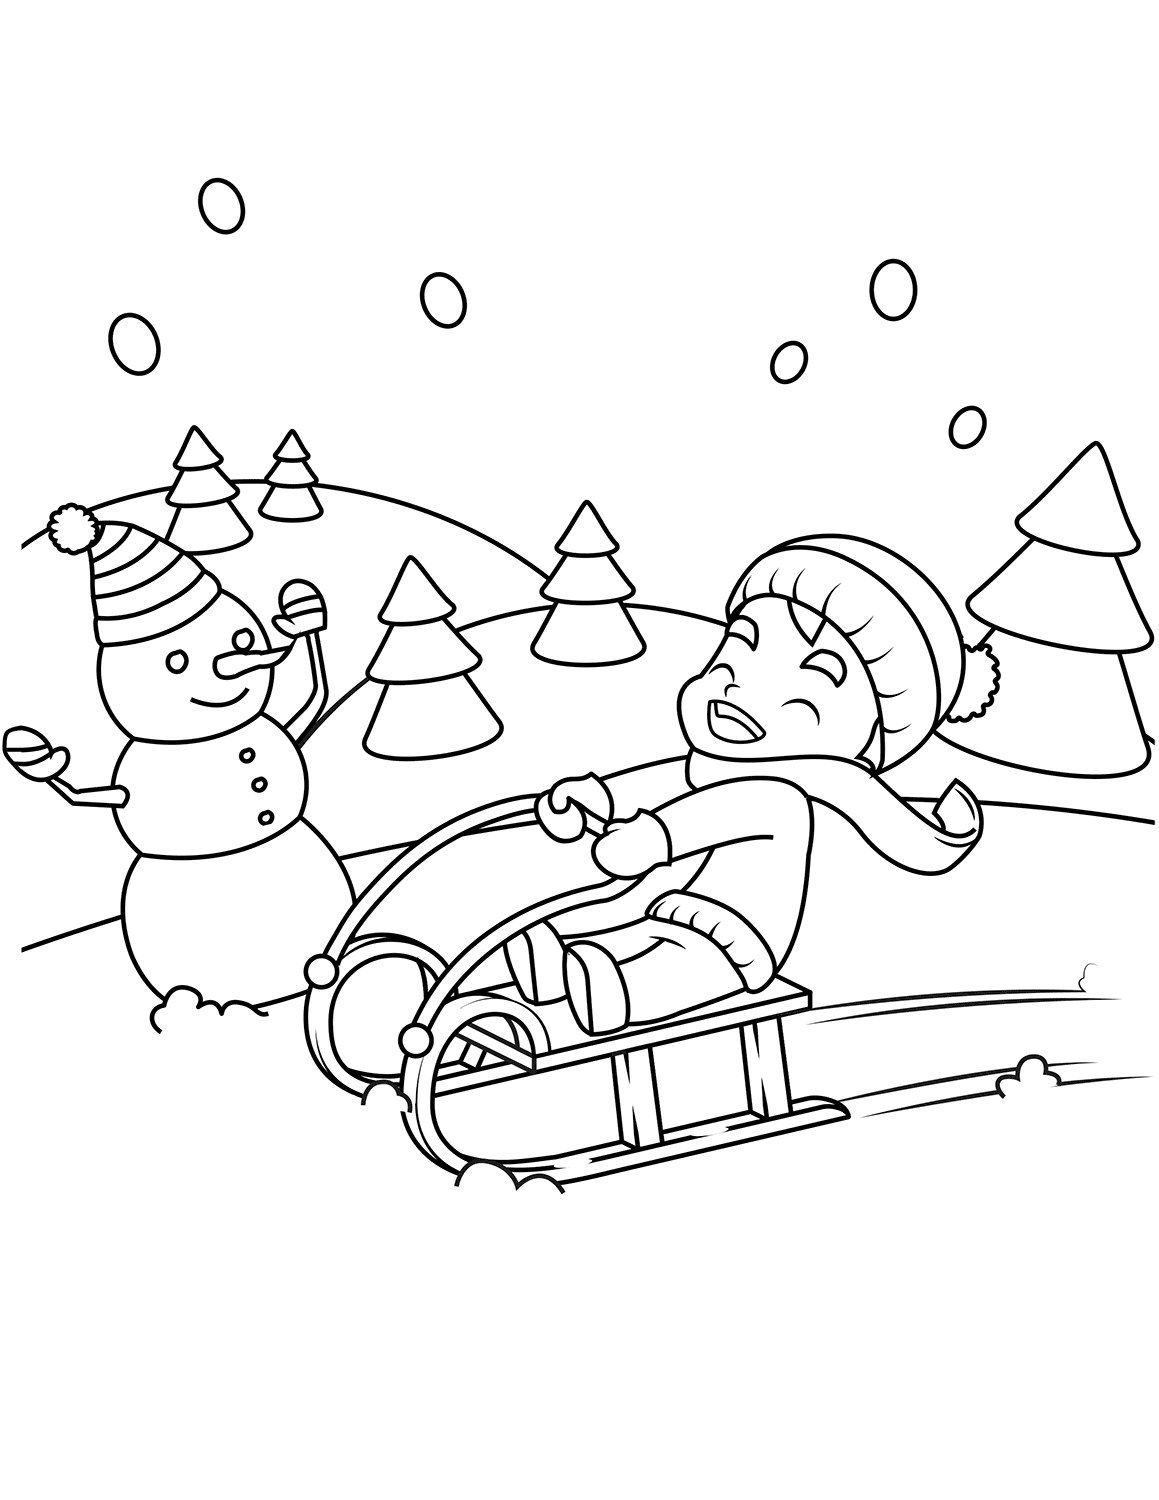 Winter Scene Coloring Pages   Coloring Cool